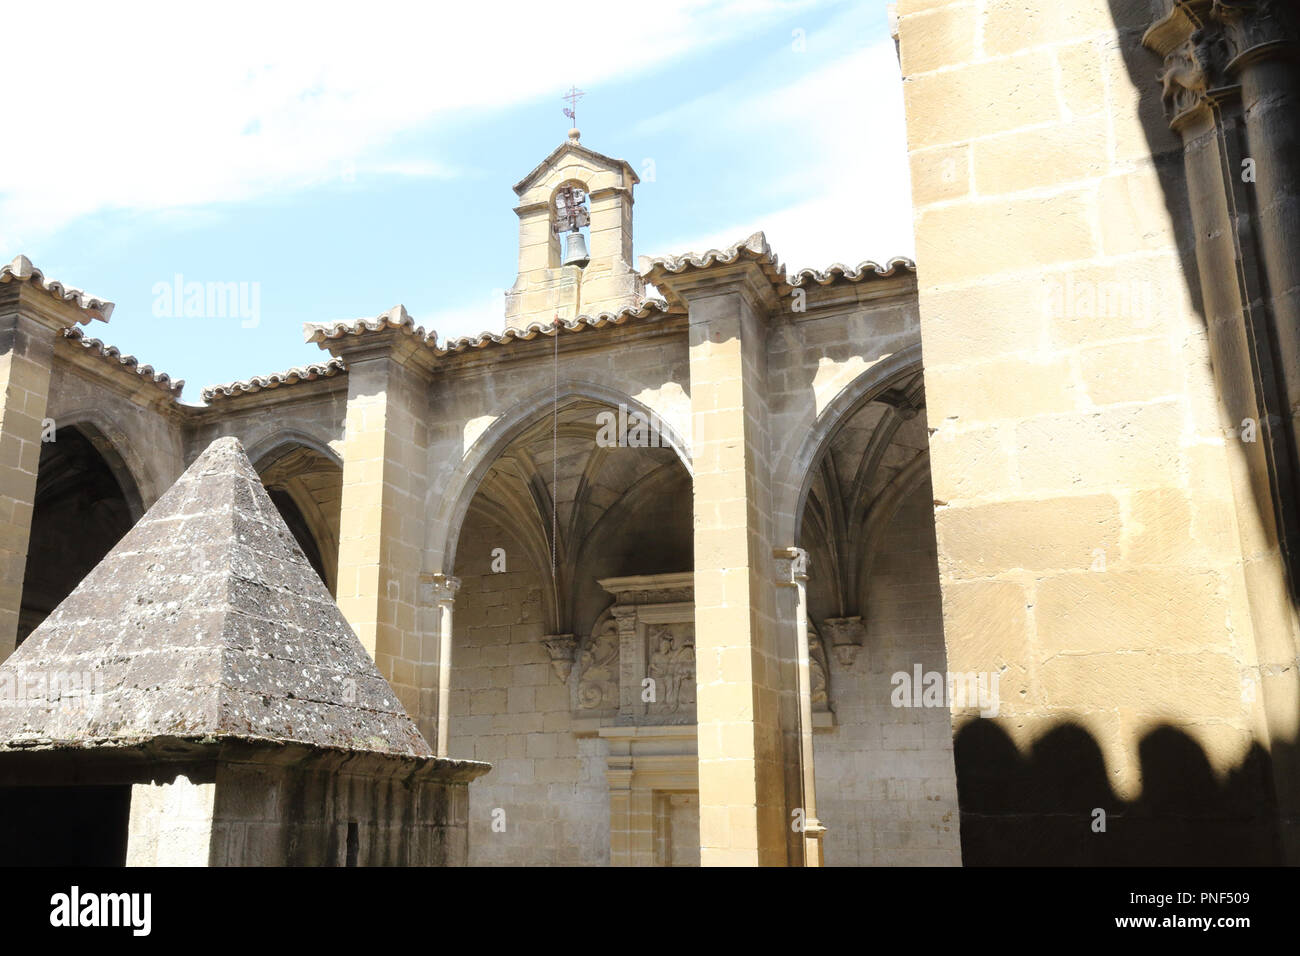 The internal cloister with the bell in the Holy Mary Church (Iglesia de Santa Maria) in Uncastillo, a rural town in the Pre-Pyrenees in Spain Stock Photo